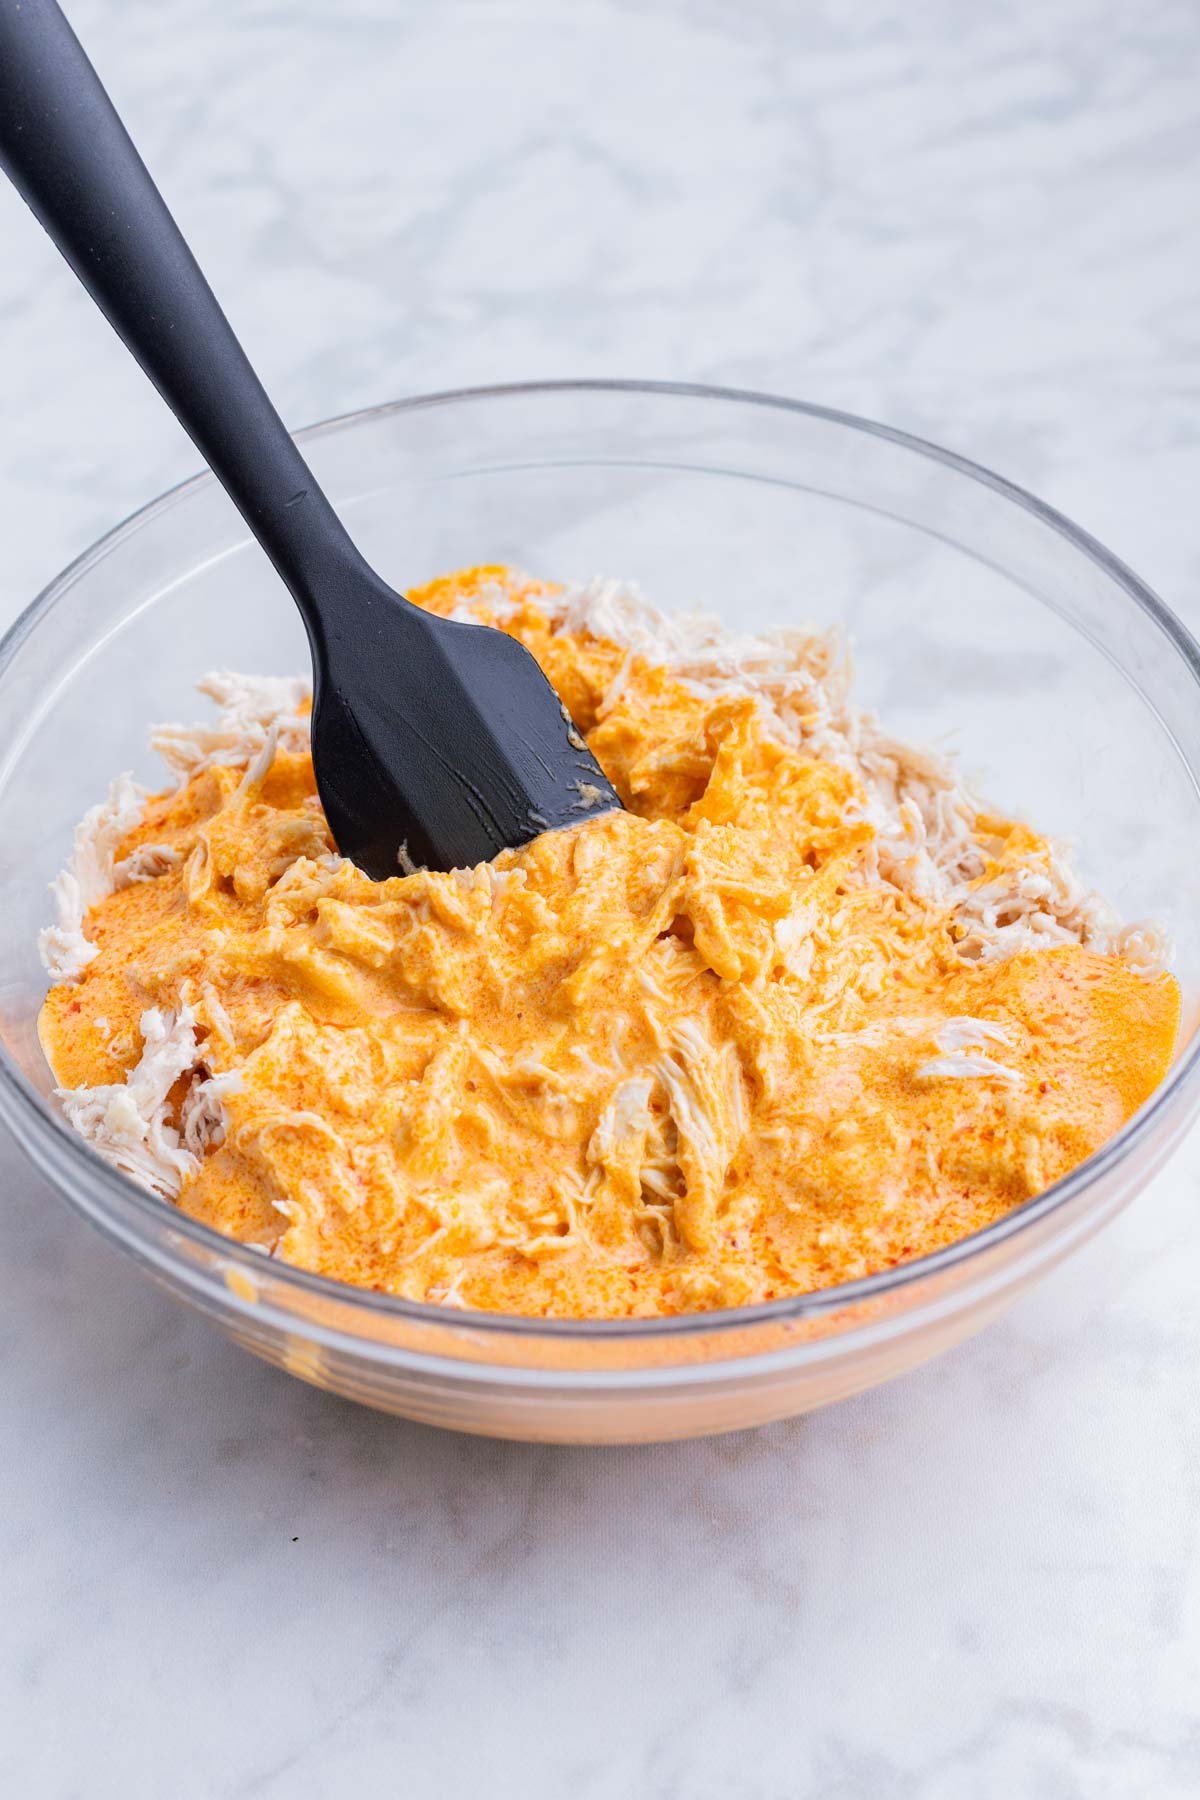 The buffalo sauce is poured over the shredded chicken.